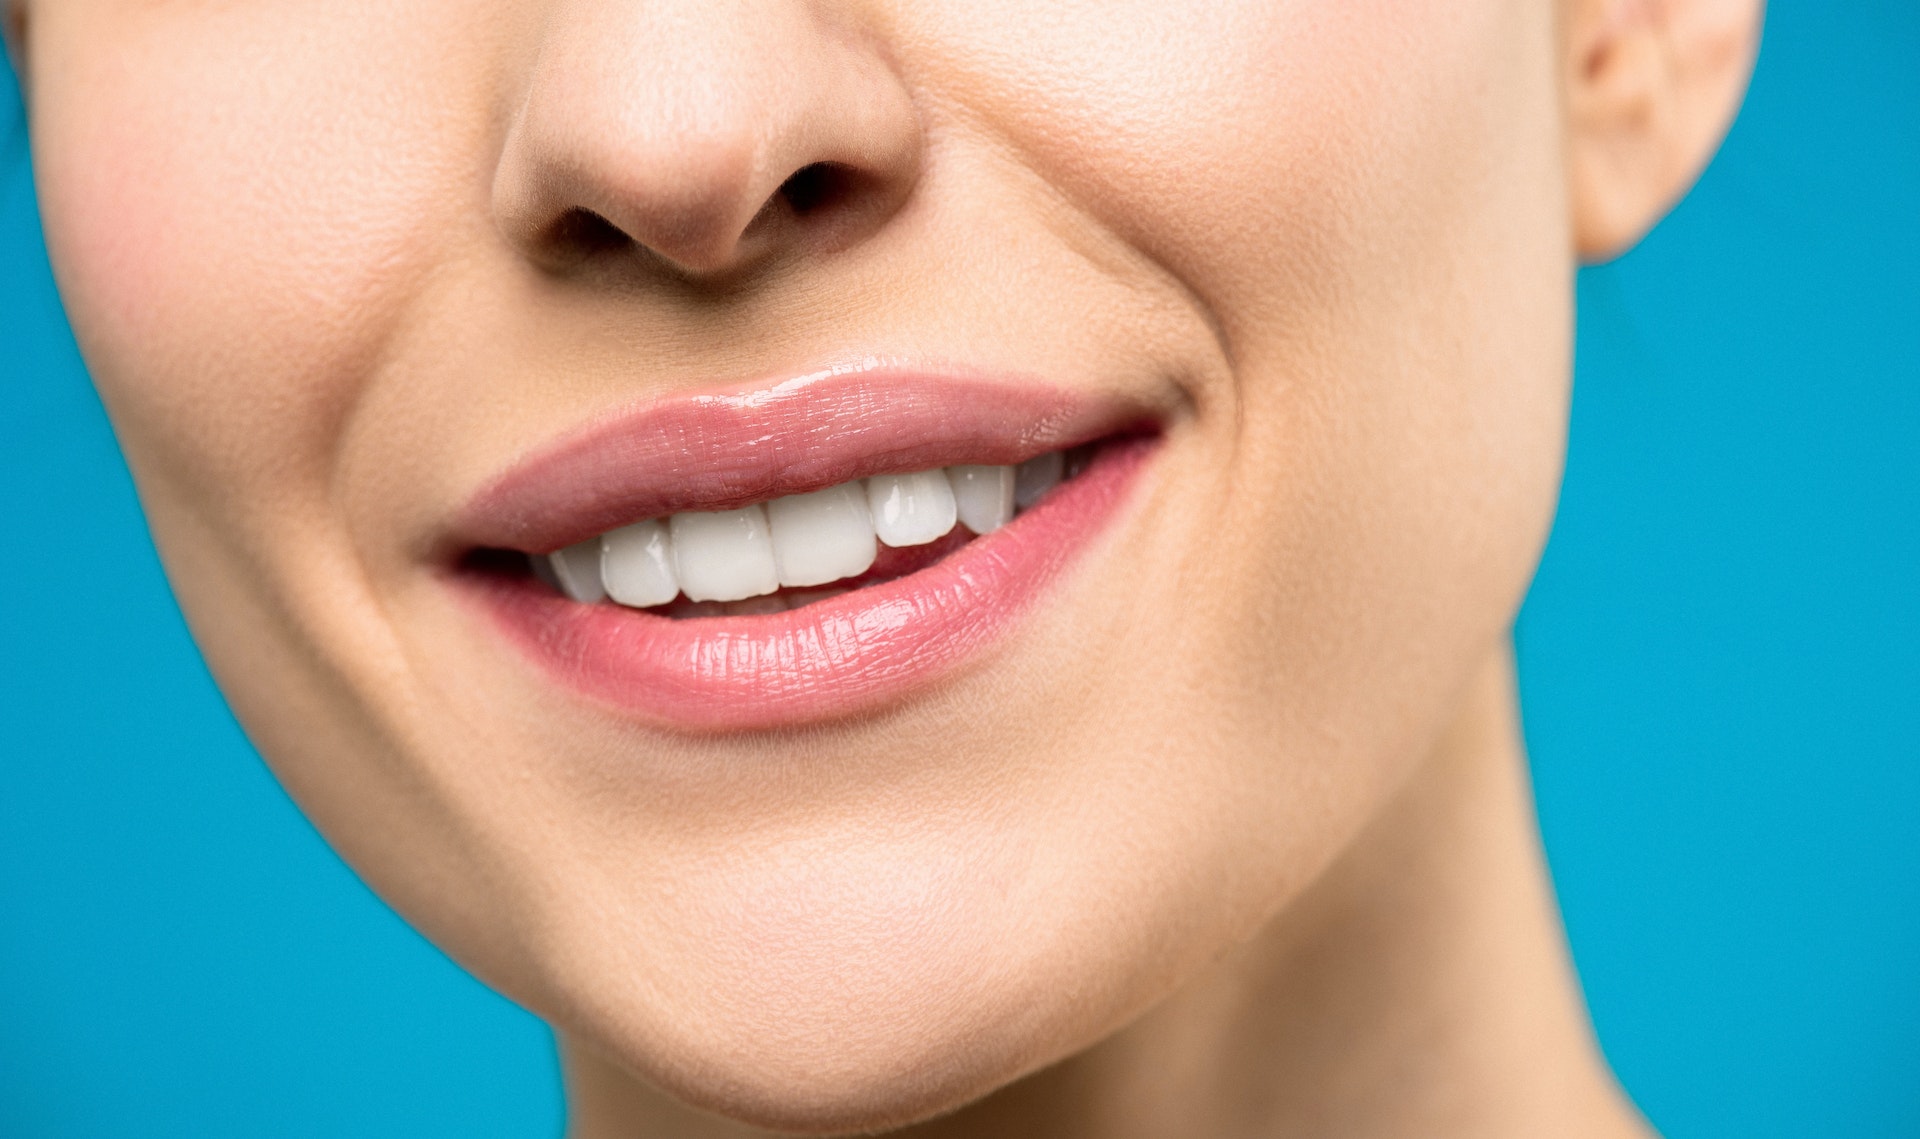 Featured image for “Brighten Your Smile with Teeth Whitening In San Diego”